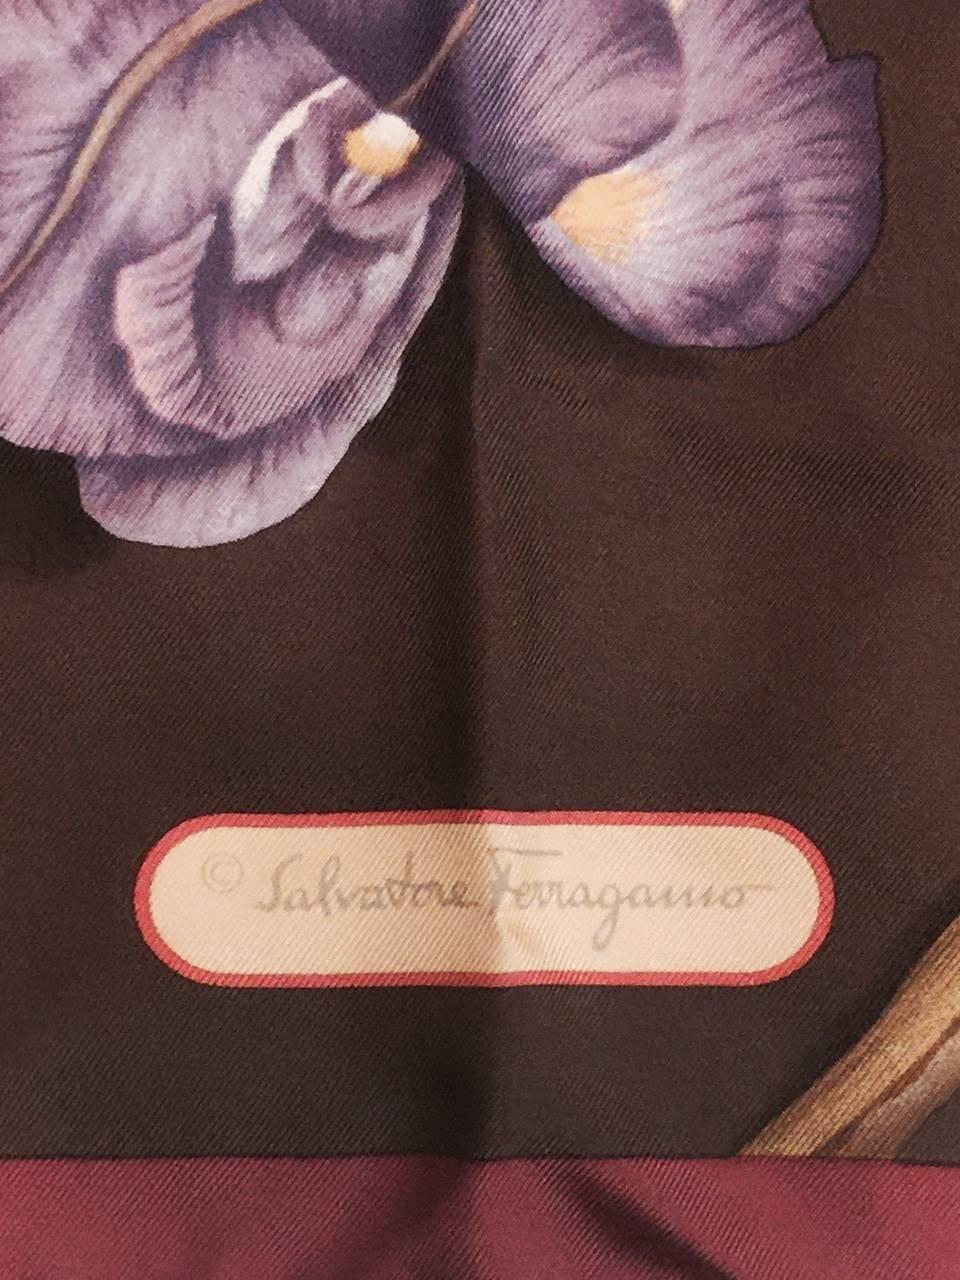 Salvatore Ferragamo Chocolate Silk Scarf is a must for any woman of substance!  Features ultra-luxurious fabric,  burgundy border, and an exotic display of calla lilies and various iris shades.  Truly elegant finish to any ensemble.  Excellent